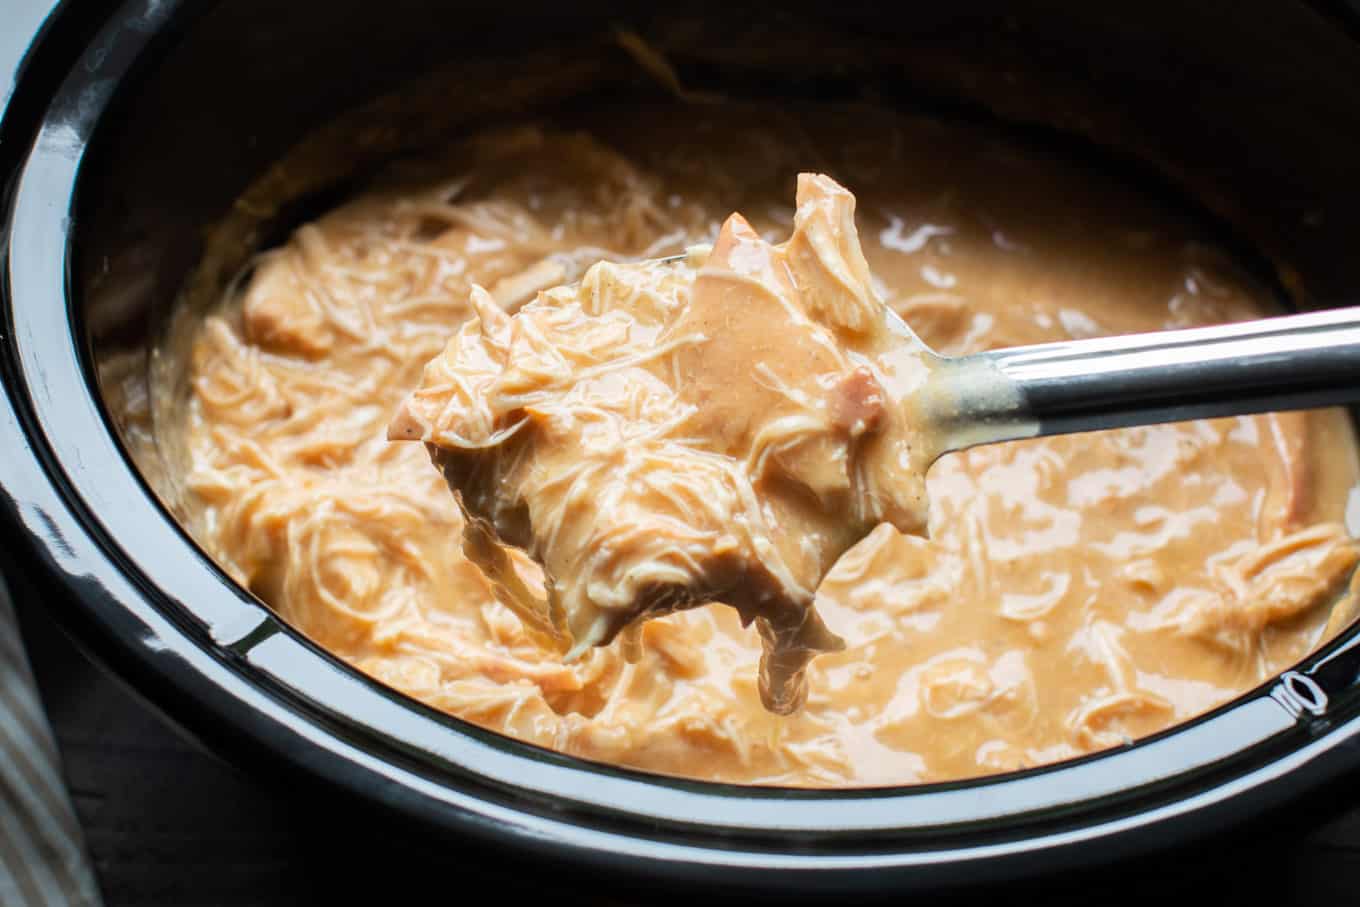 shredded chicken in gravy on a spoon coming from slow cooker.